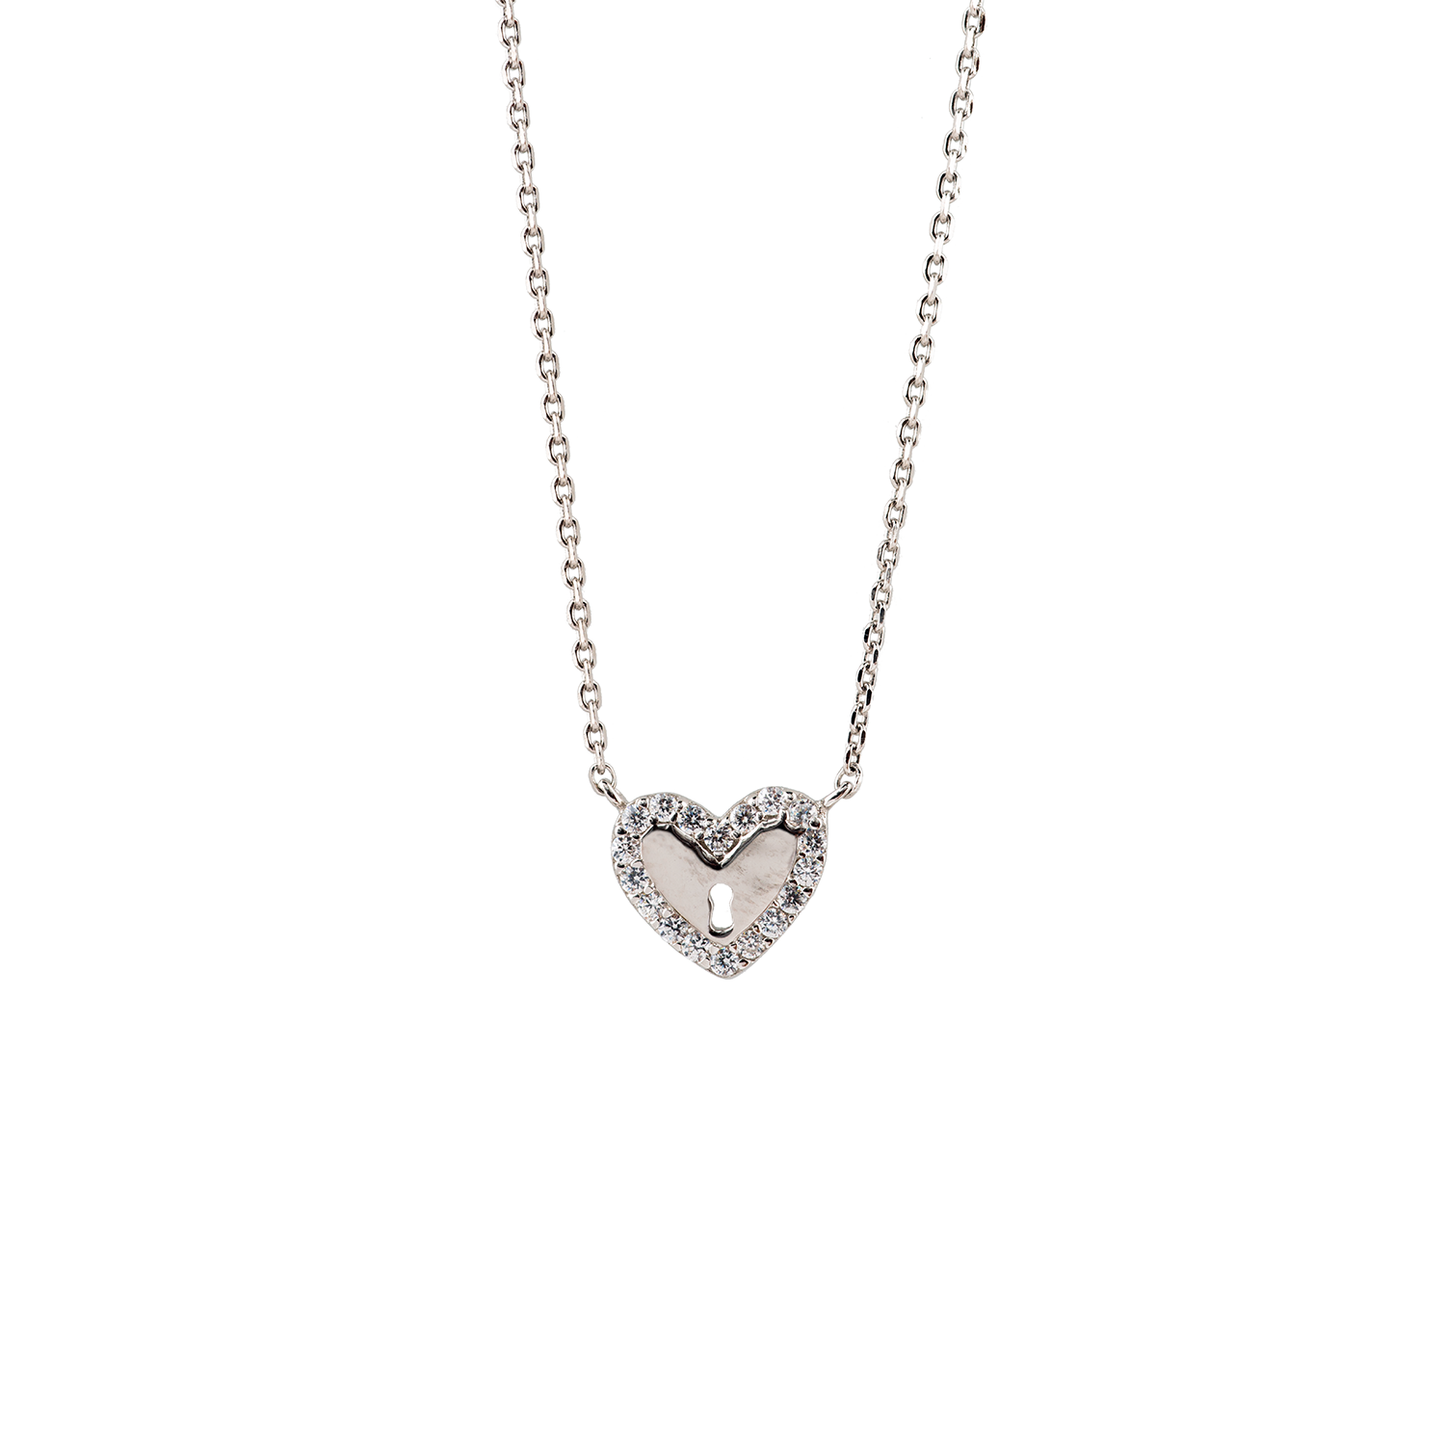 Fine Sterling Silver Necklace with A Silver Heart Pendant with White Zirconias